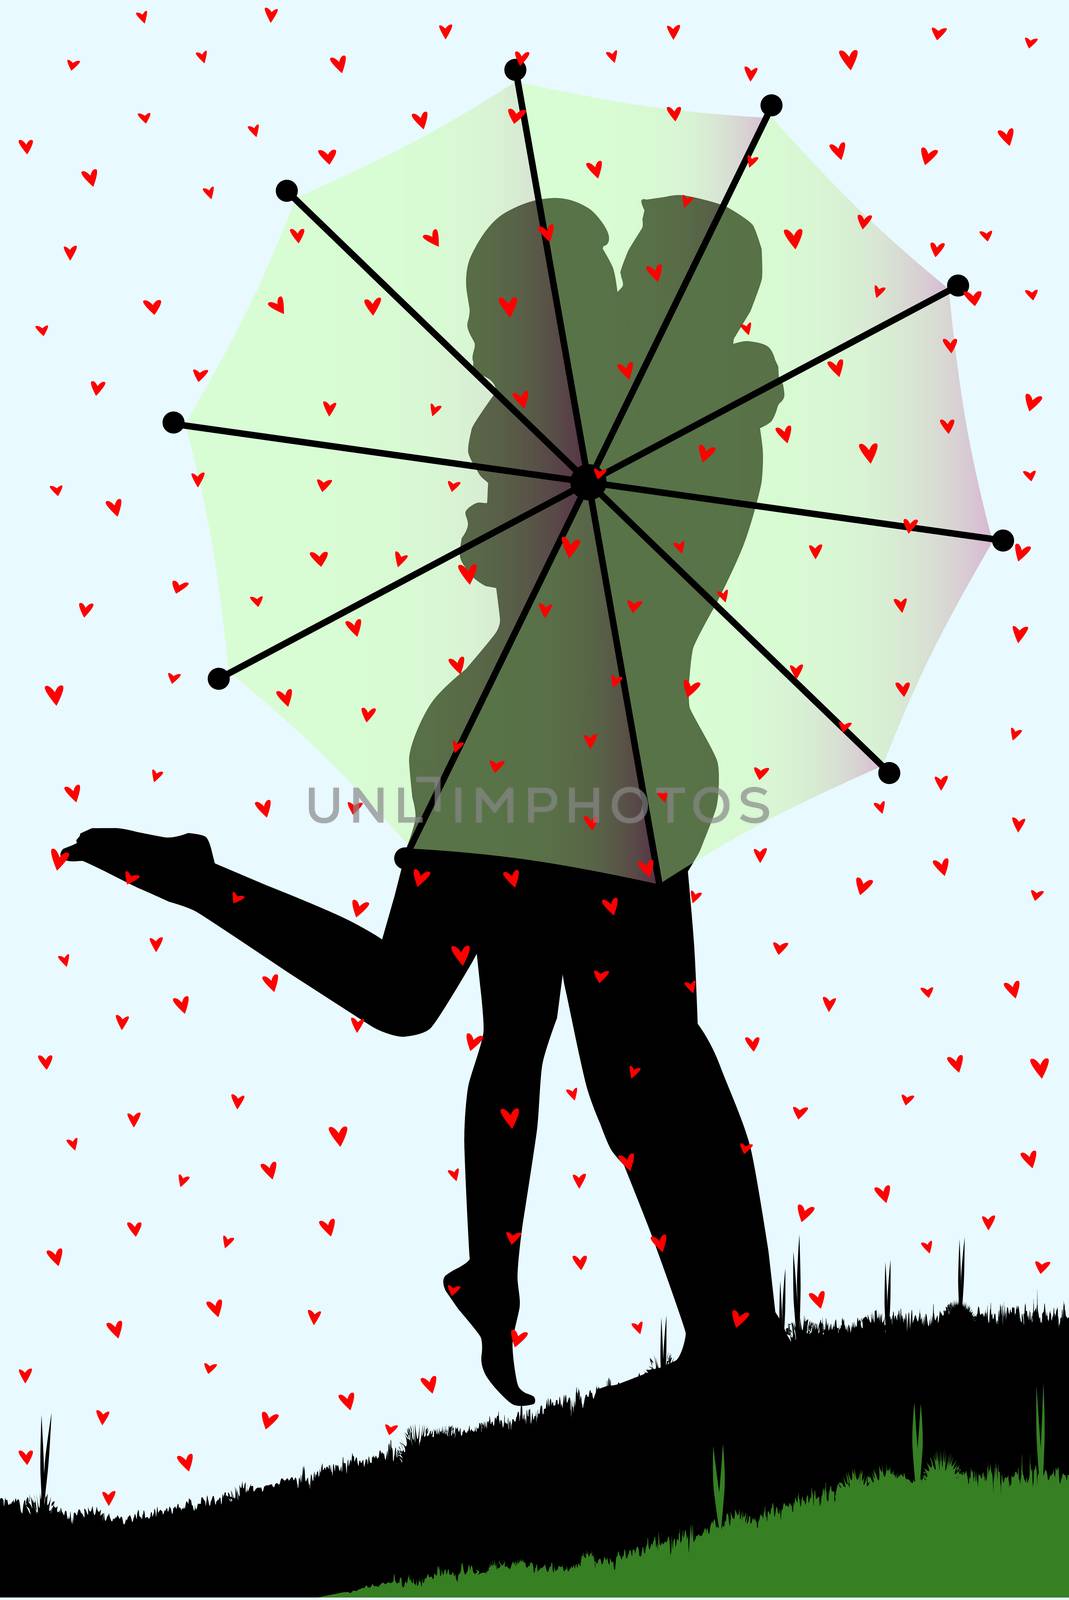 A courting couple, silhouetted, kissing behind an umbrella, during a downpour of red cupids hearts.